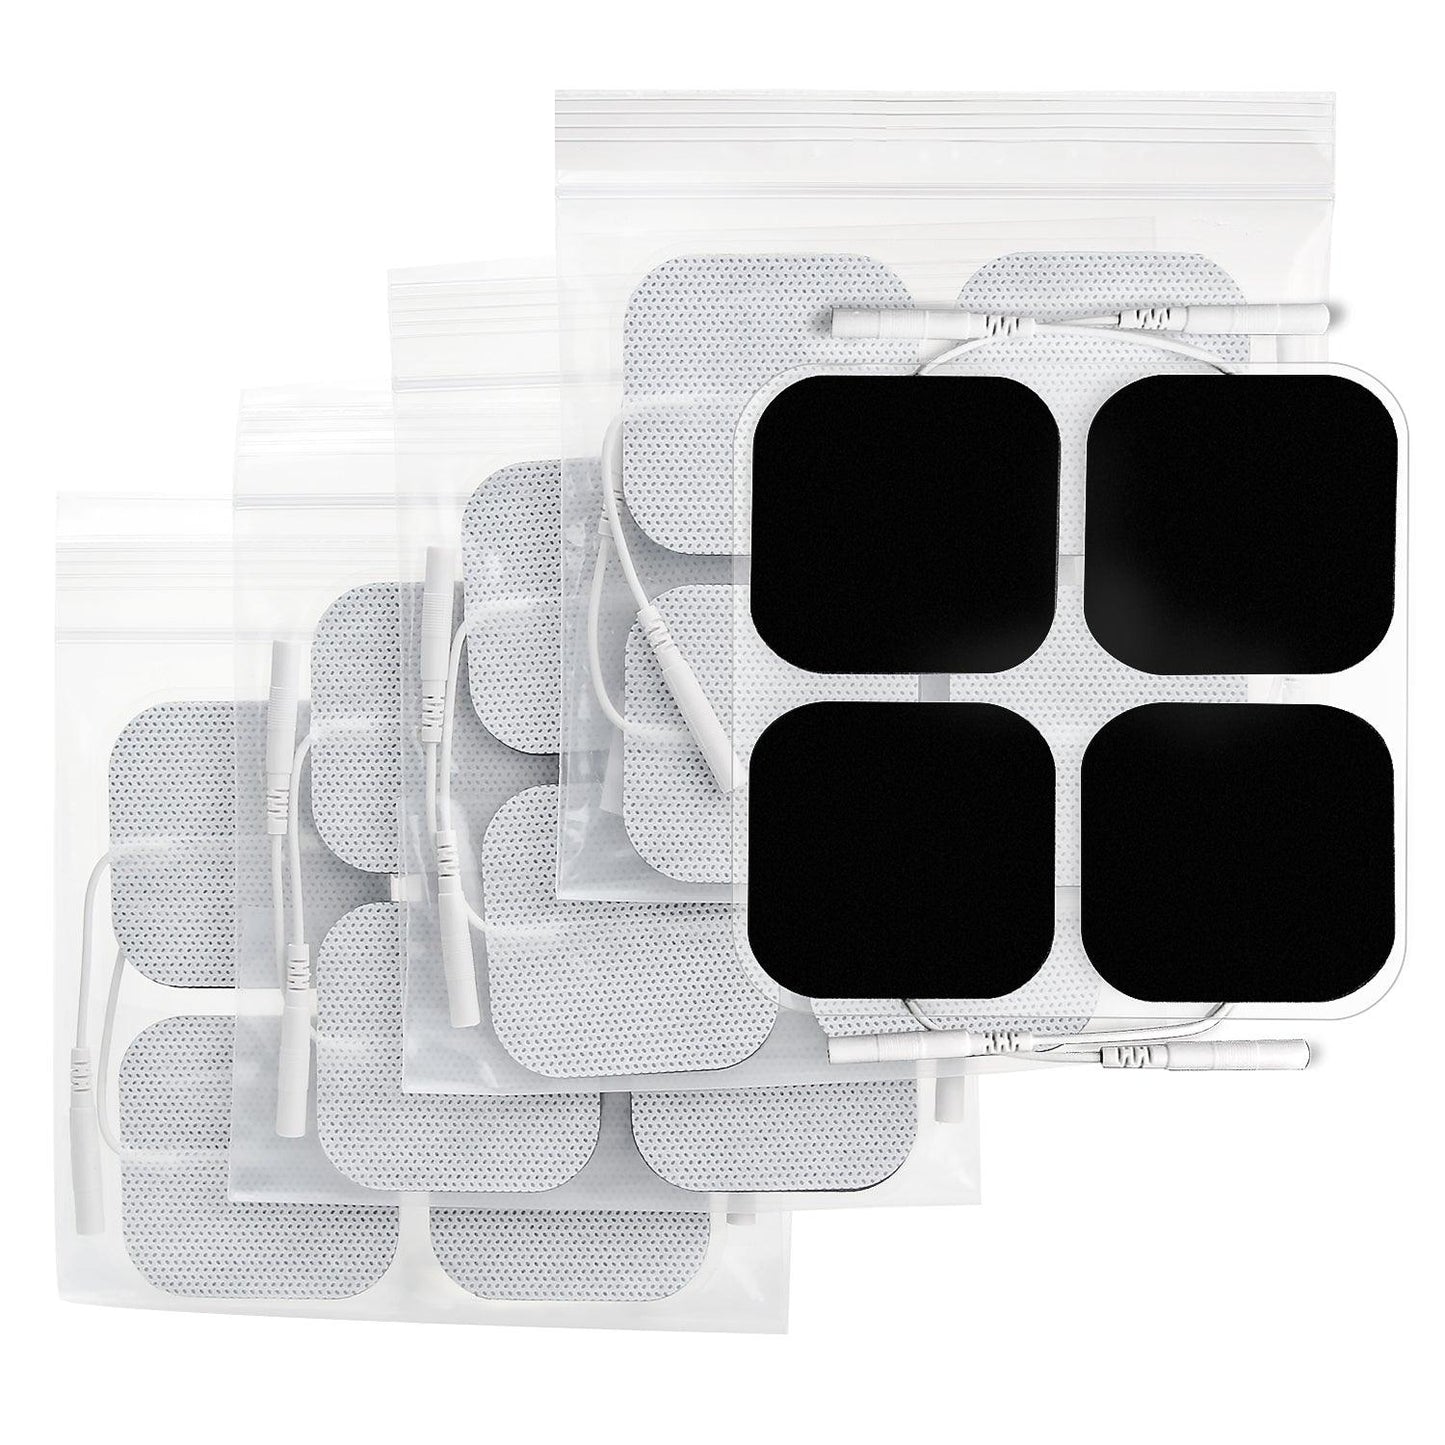 Wireless Tens Unit Replacement Pads - Broadway Home Medical